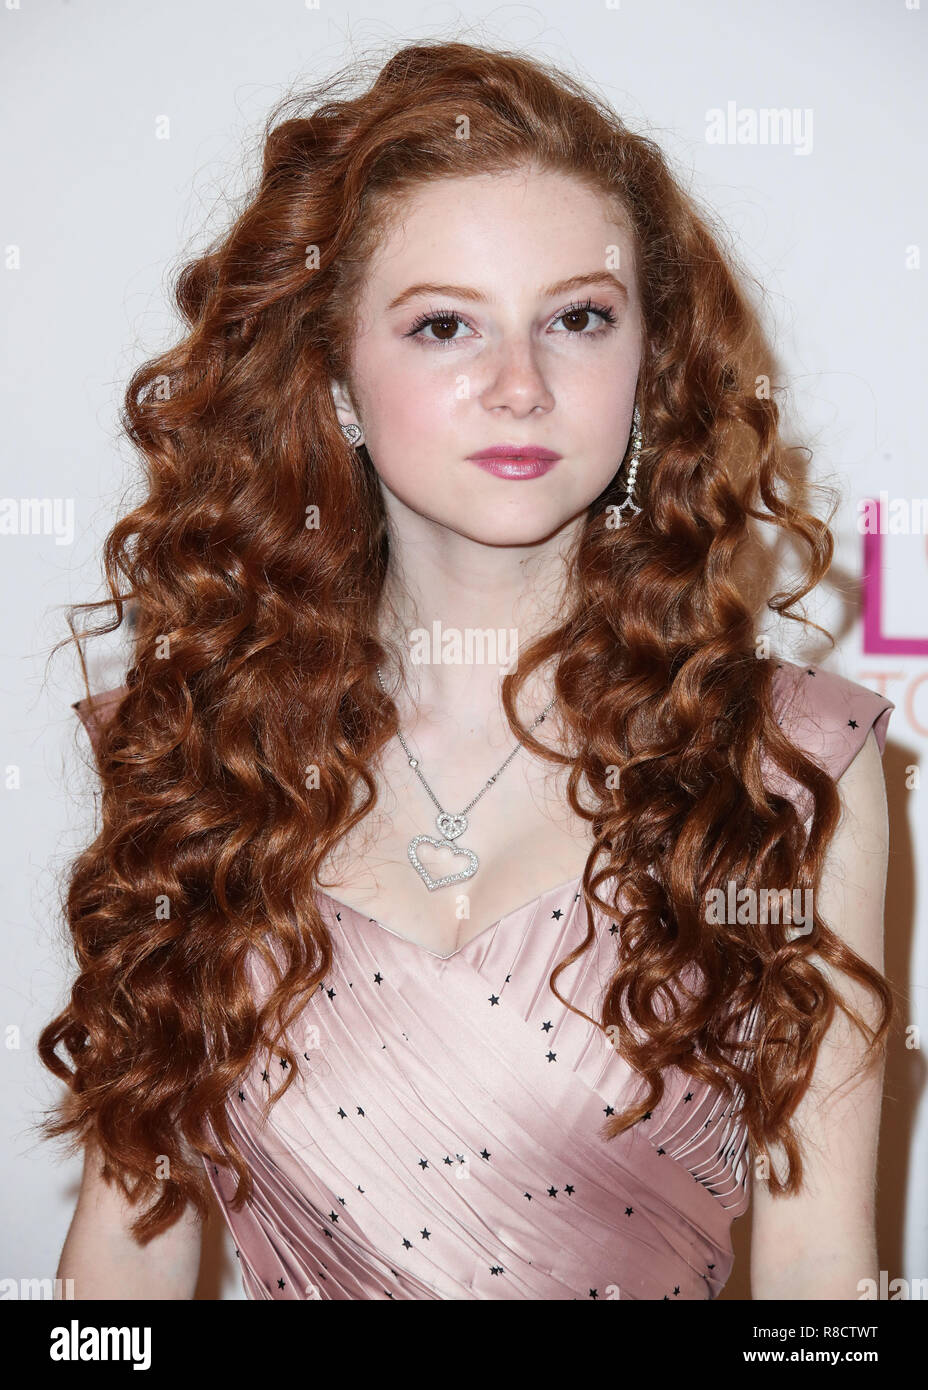 BEVERLY HILLS, LOS ANGELES, CA, USA - APRIL 20: Francesca Capaldi at the 25th Annual Race To Erase MS Gala held at The Beverly Hilton Hotel on April 20, 2018 in Beverly Hills, Los Angeles, California, United States. (Photo by Xavier Collin/Image Press Agency) Stock Photo